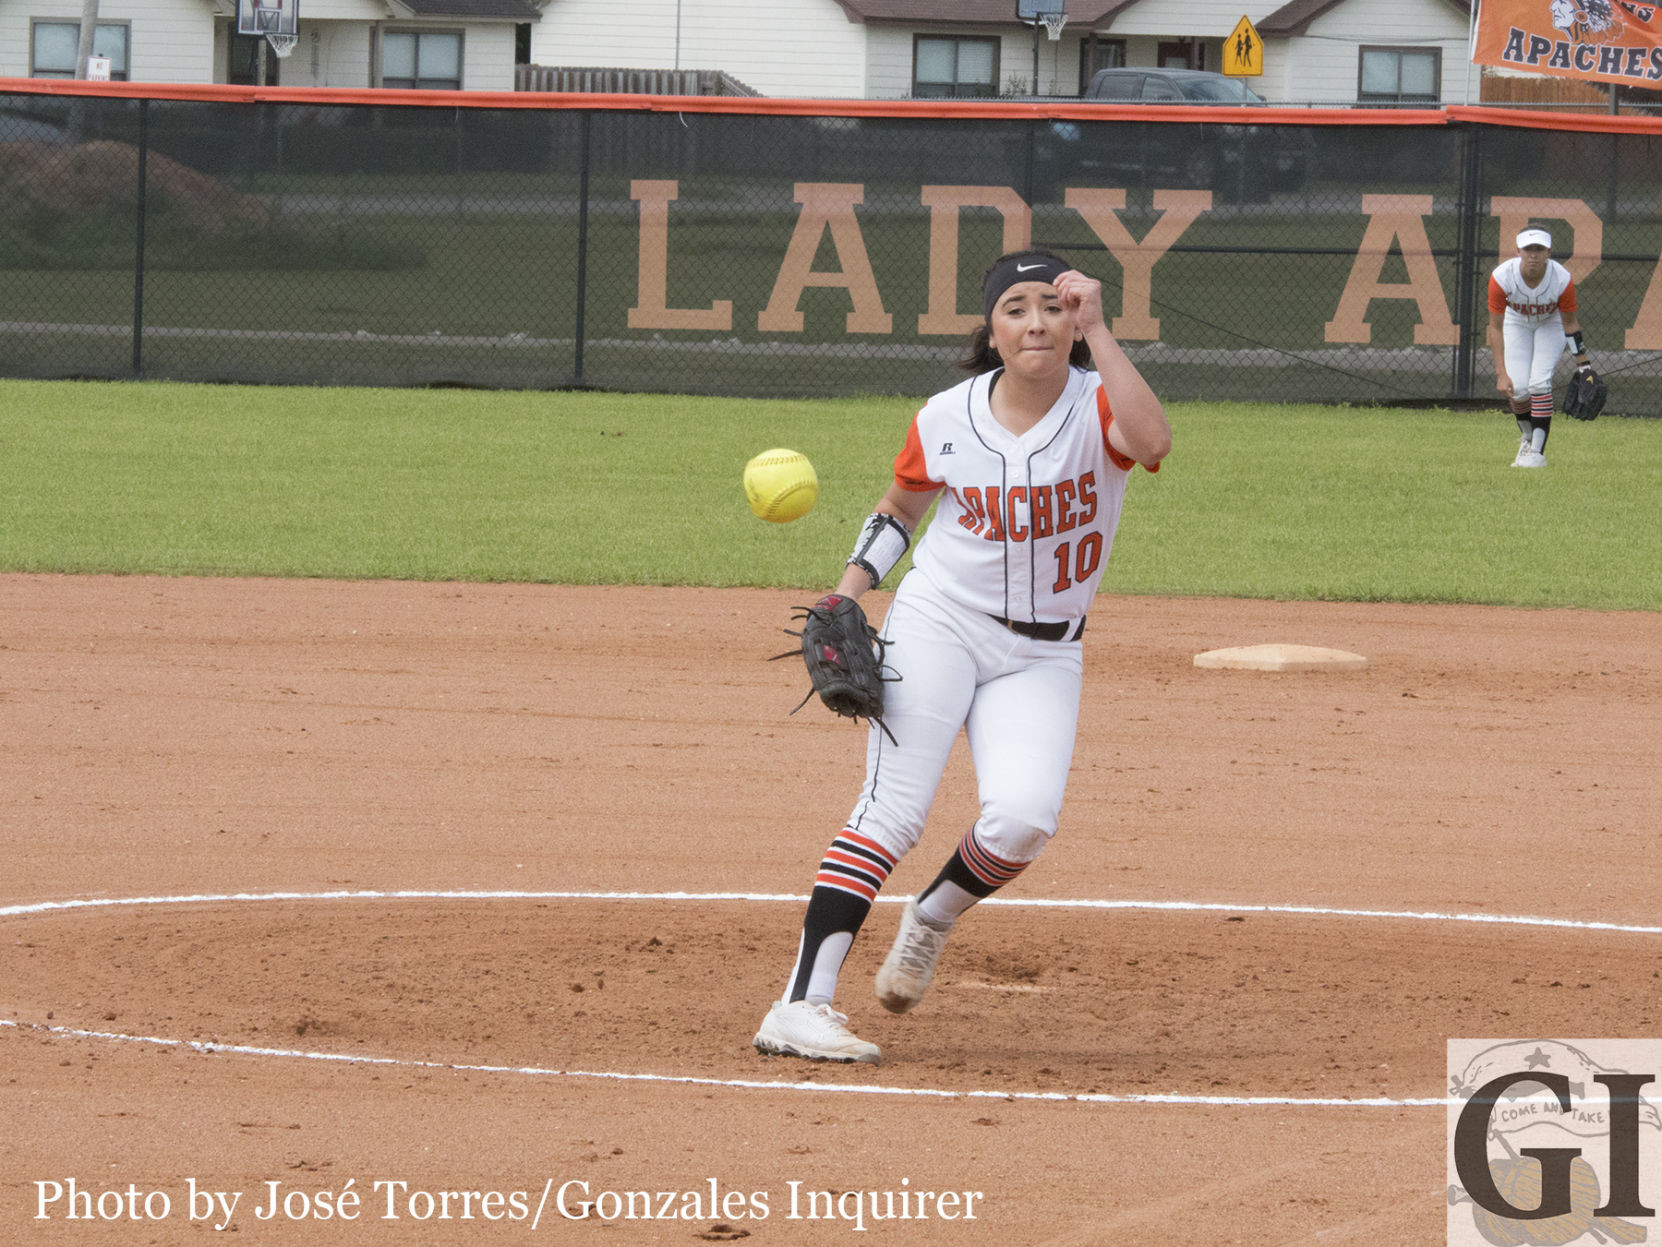 Jaycie Burton took to the mound, taking the win after pitching for three innings and striking out six batters. The Lady Apaches shut out Austin Eastside Memorial 15-0.